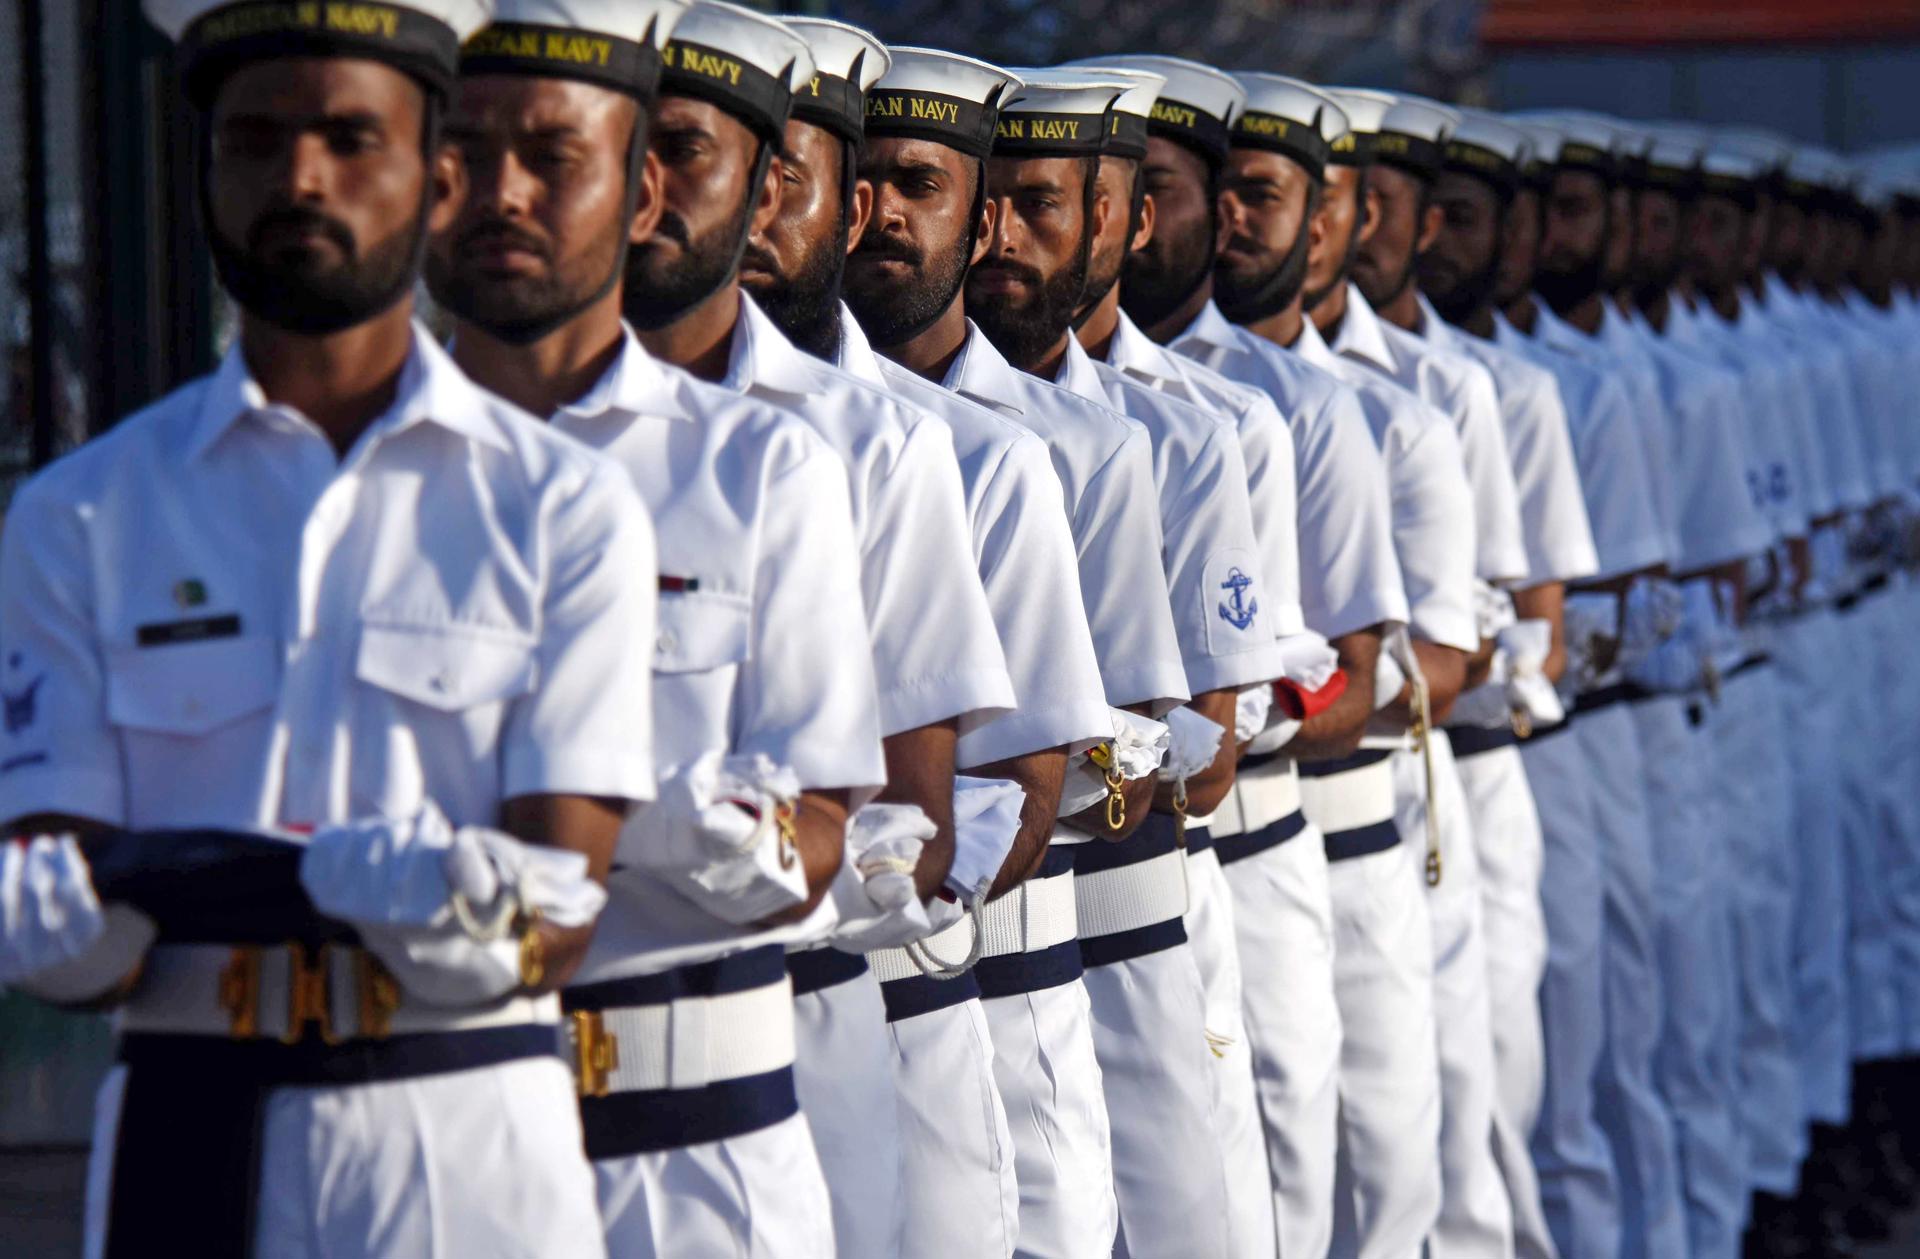 Pakistani Navy soldiers at the opening ceremony of the Pakistan Navy's 8th Multinational Exercise AMAN-23 for Peace, in Karachi, Pakistan, 10 February 2023. EFE/EPA/FILE/SHAHZAIB AKBER